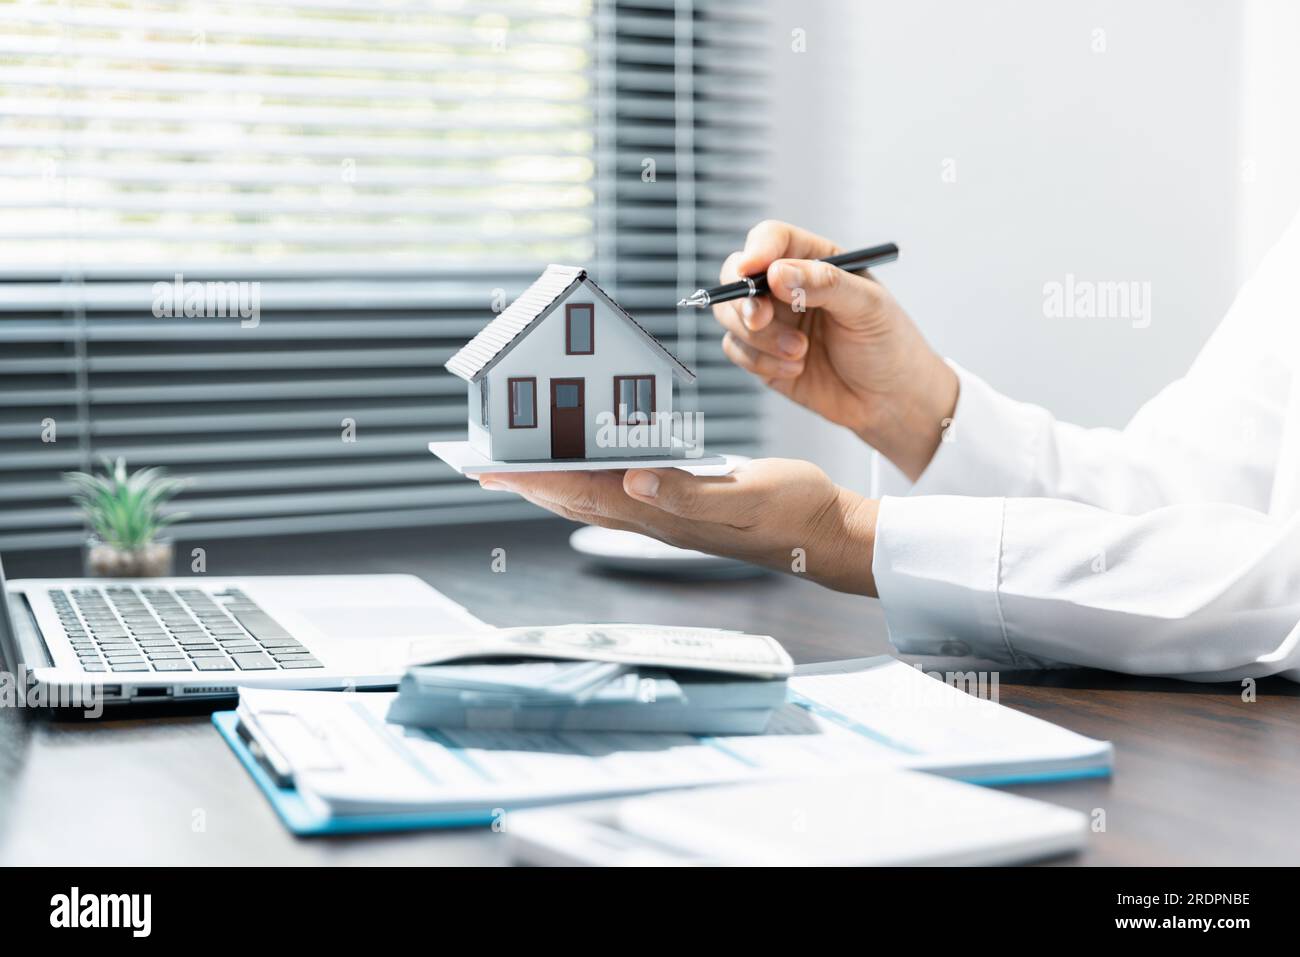 Single family house, concept of real estate, Sales manager or real estate agent prepares to hand over the keys and the house together with the insuran Stock Photo